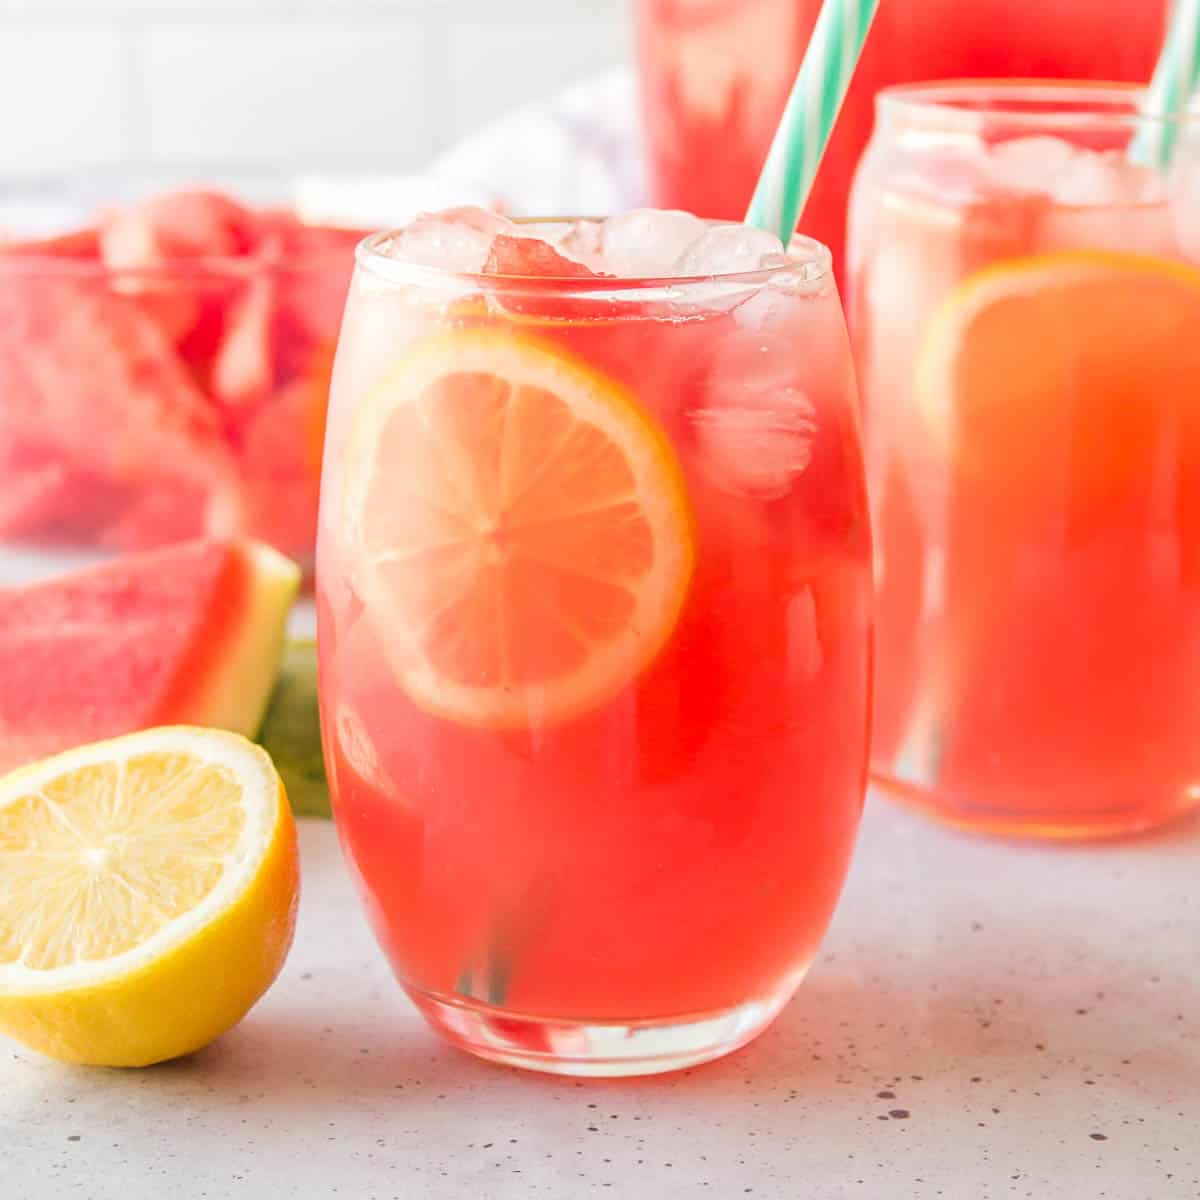 A delicious juicy taste of summer. Whole Punch: Double Dreamsicle